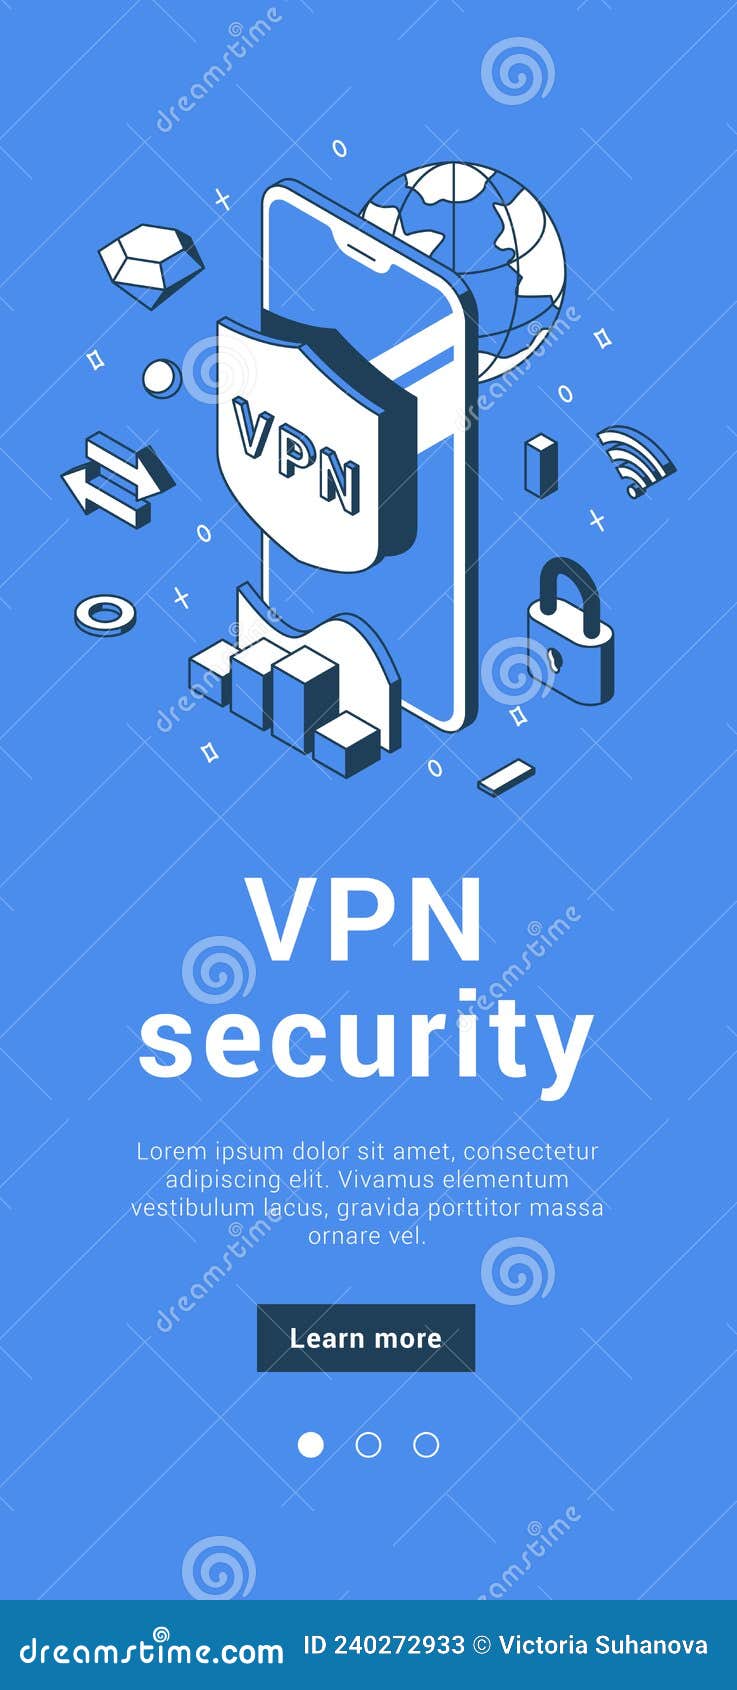 vpn security service. virtual private network personal data protect connection datum transfer 